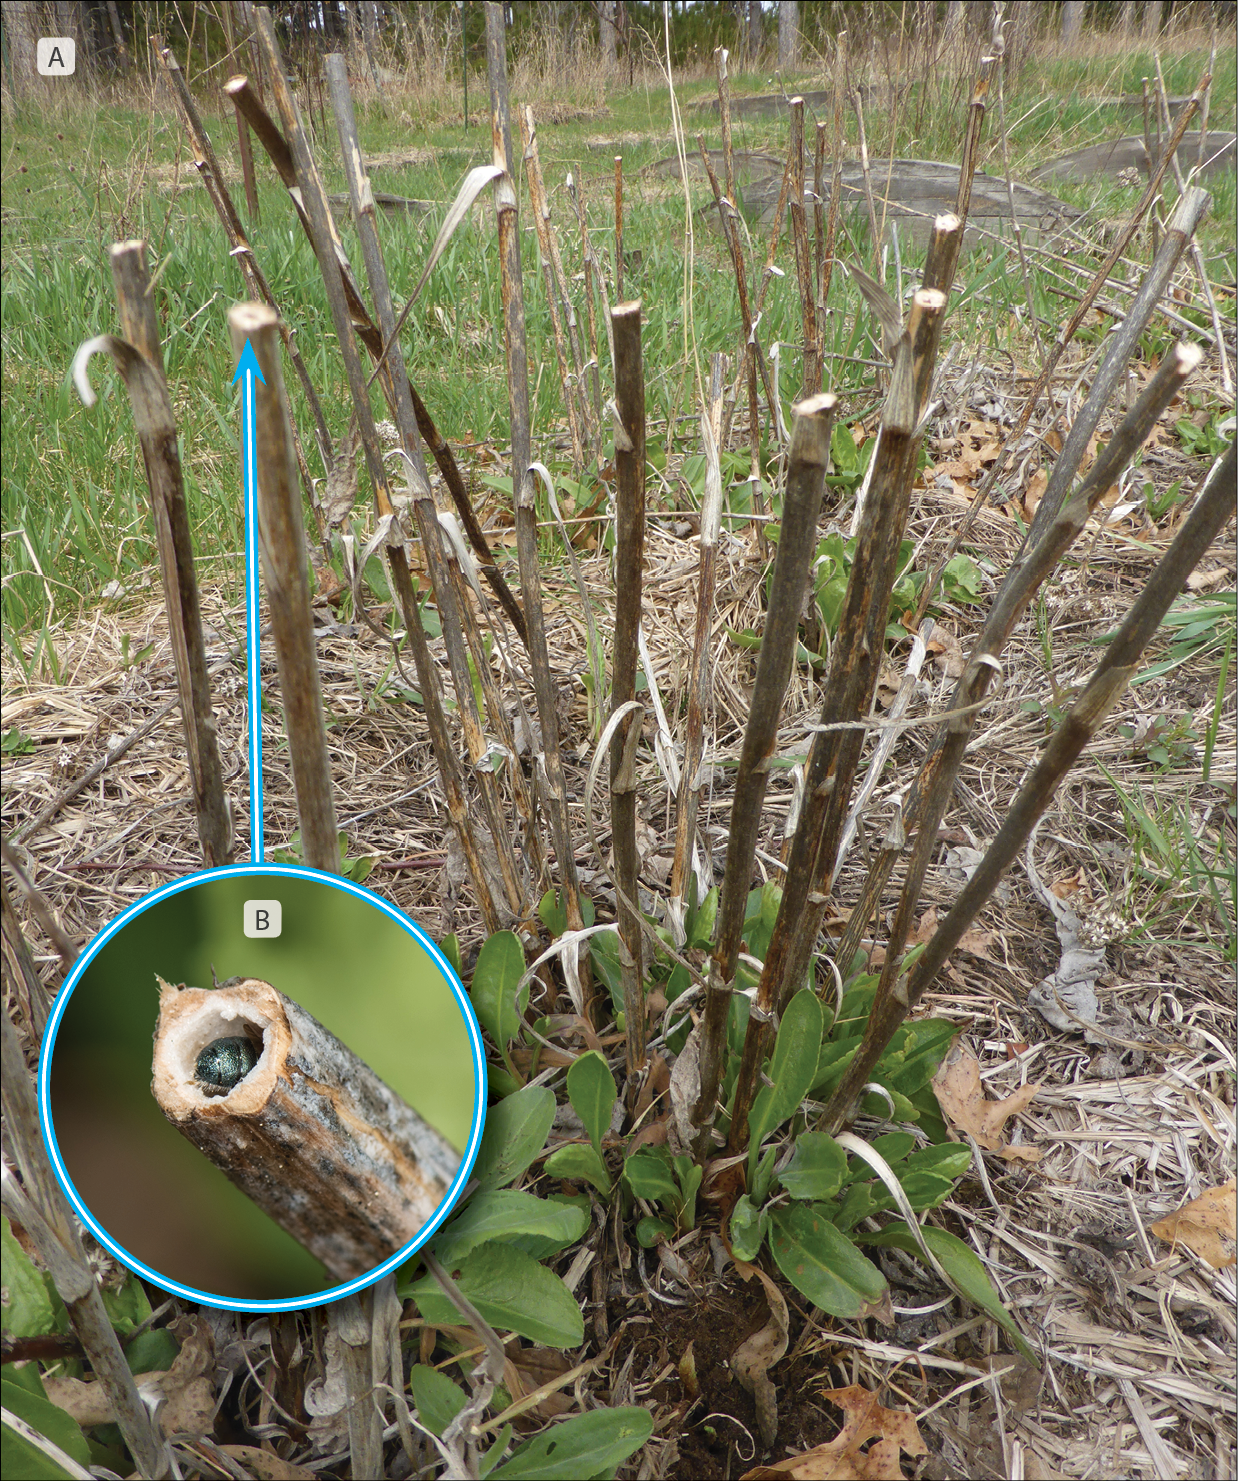 This diagram shows a photo of a bush that has been pruned, with cleanly-cut stems, and a closeup image of a small bee peering out from the hollow stem's opening.